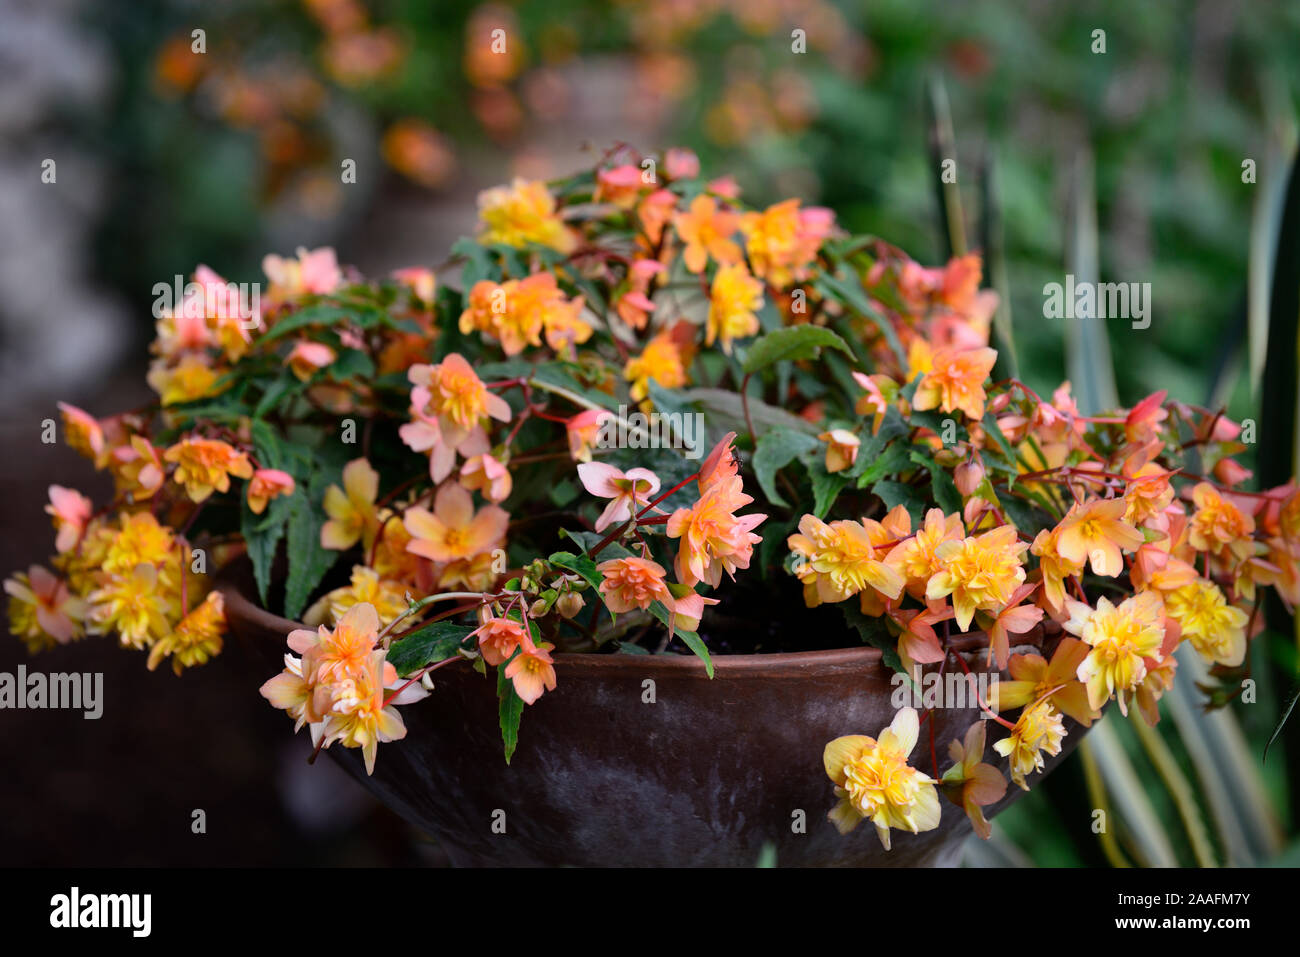 Begonia Hanging Basket Apricot,pot,container,pots,containers,display,displays,gardening,flower,flowers,display,displays,RM Floral Stock Photo